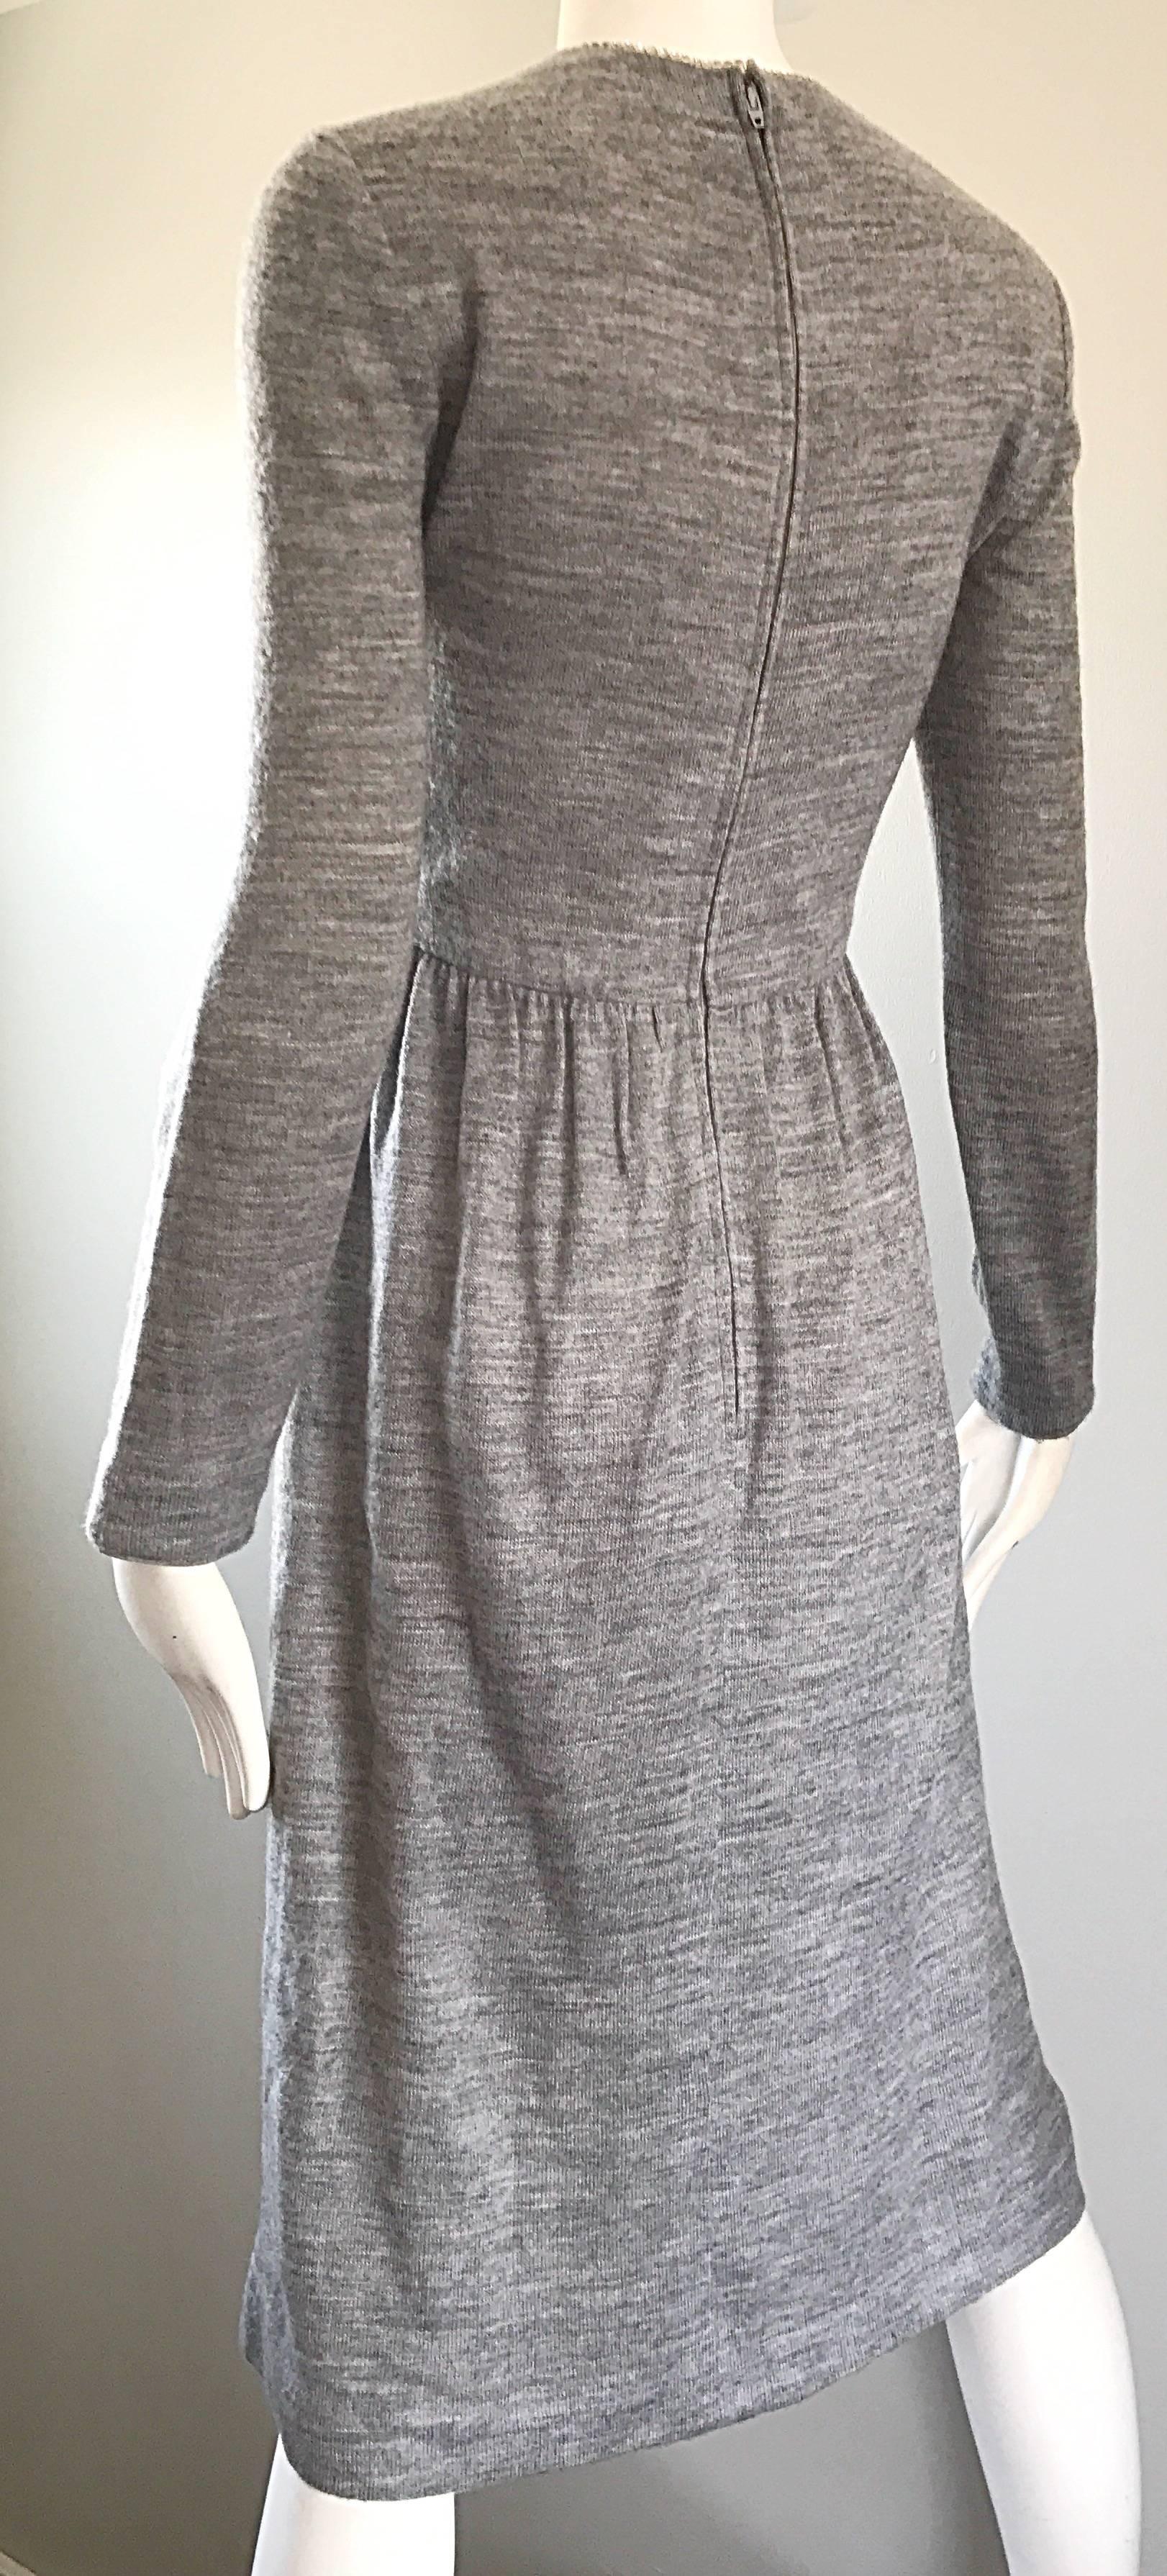 1970s Heather Grey + Rhinestones Long Sleeve V Neck 70s Vintage Sweater Dress  In Excellent Condition For Sale In San Diego, CA